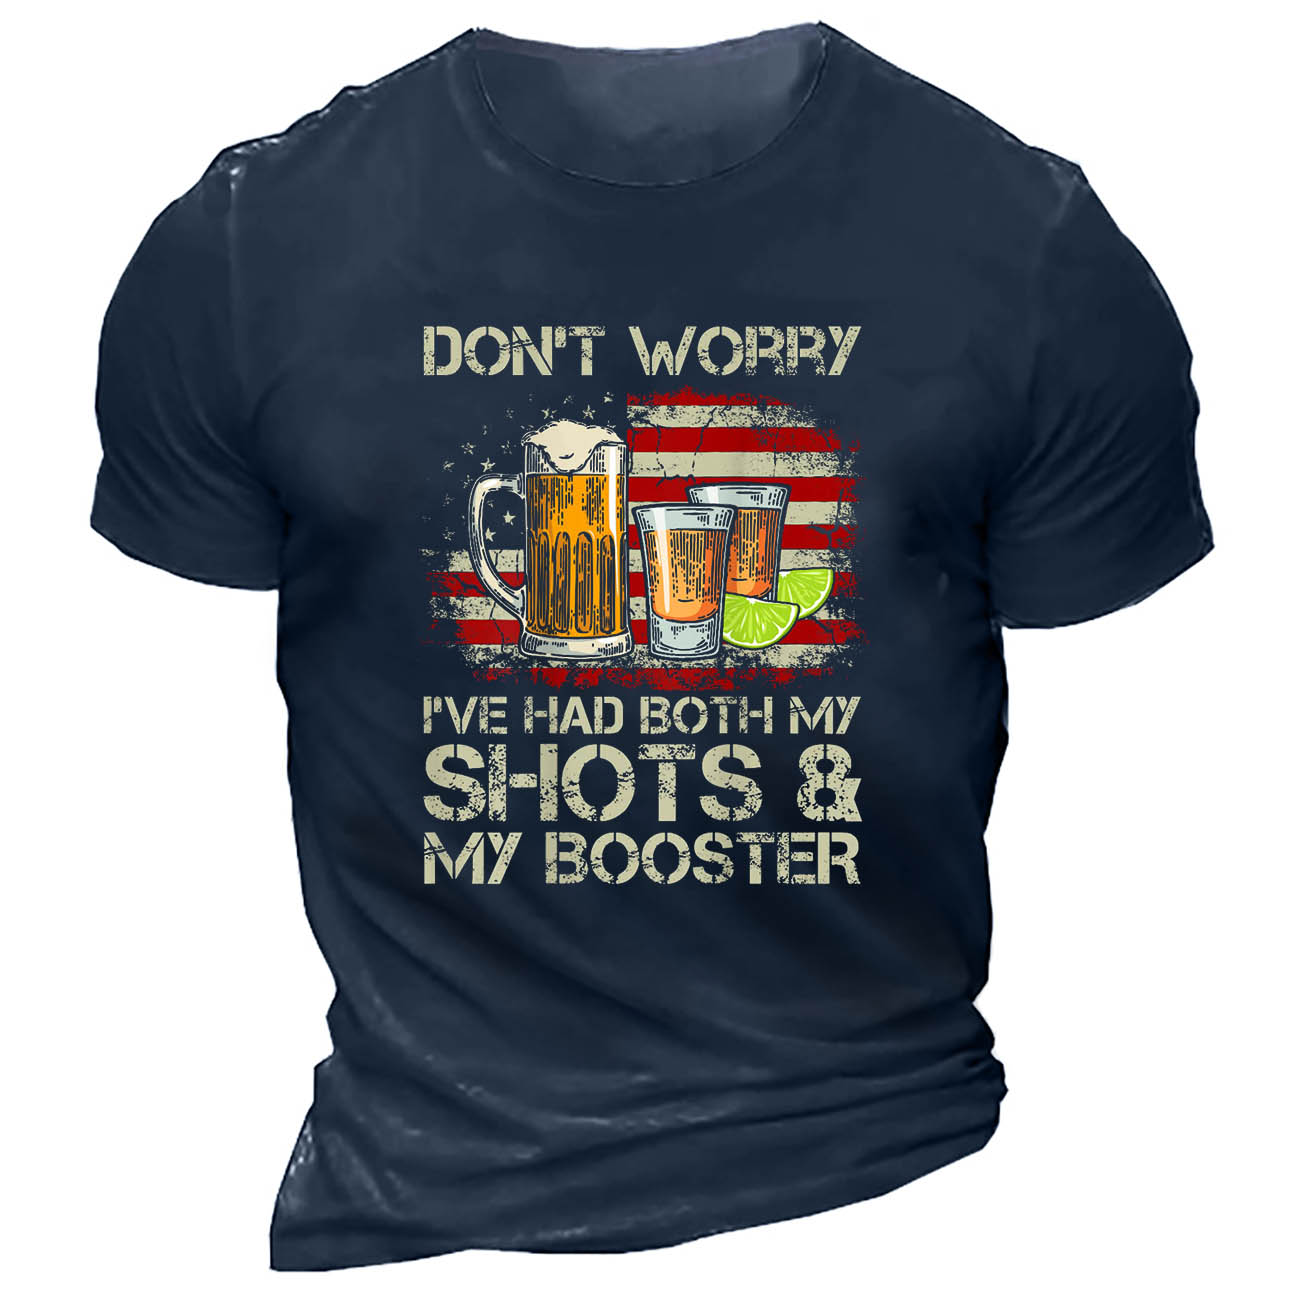 Men's Don't Worry I've Chic Had Both My Shots And My Booster Cotton T-shirt